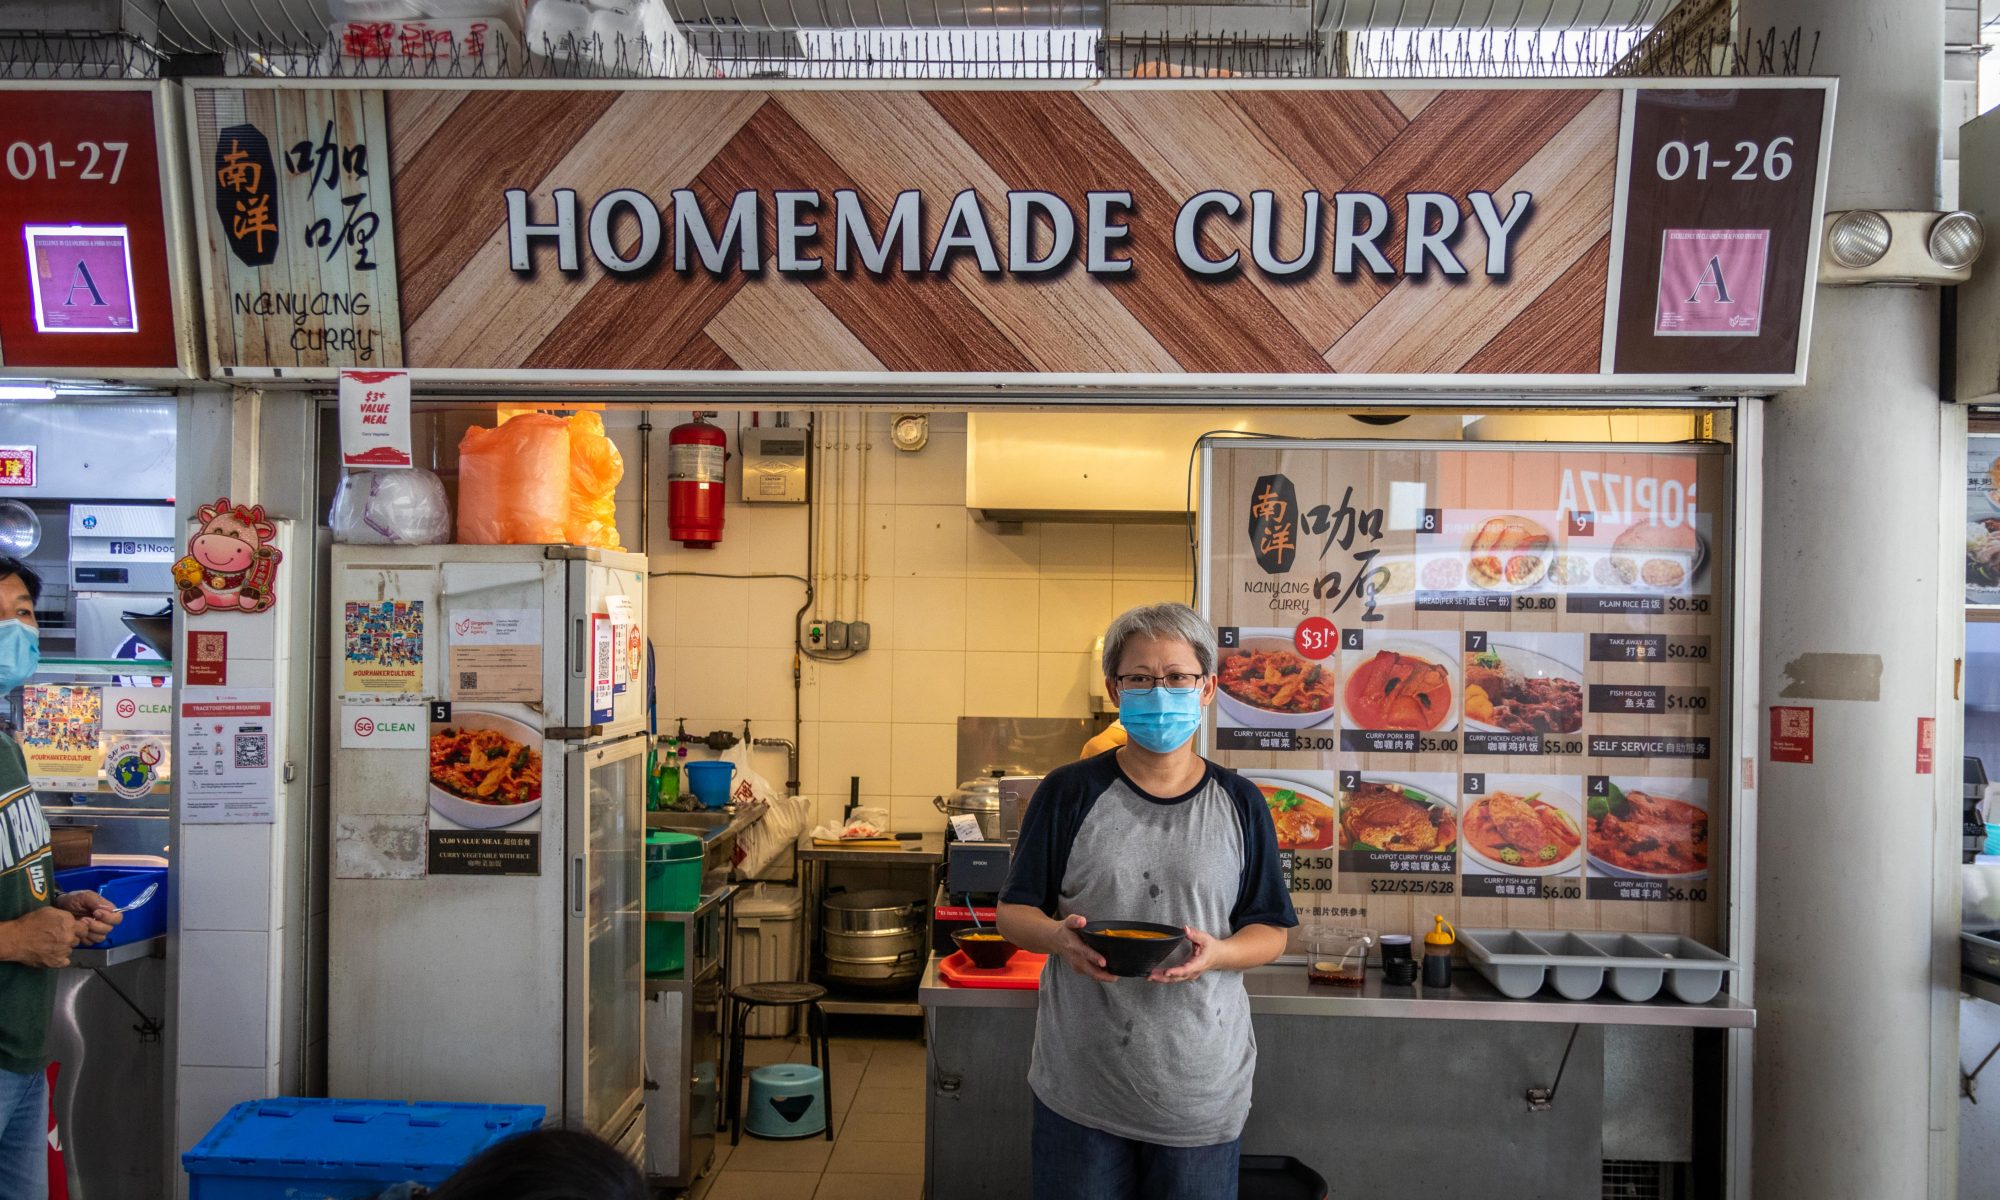 Owner of Homemade Curry, available on WhyQ for delivery.